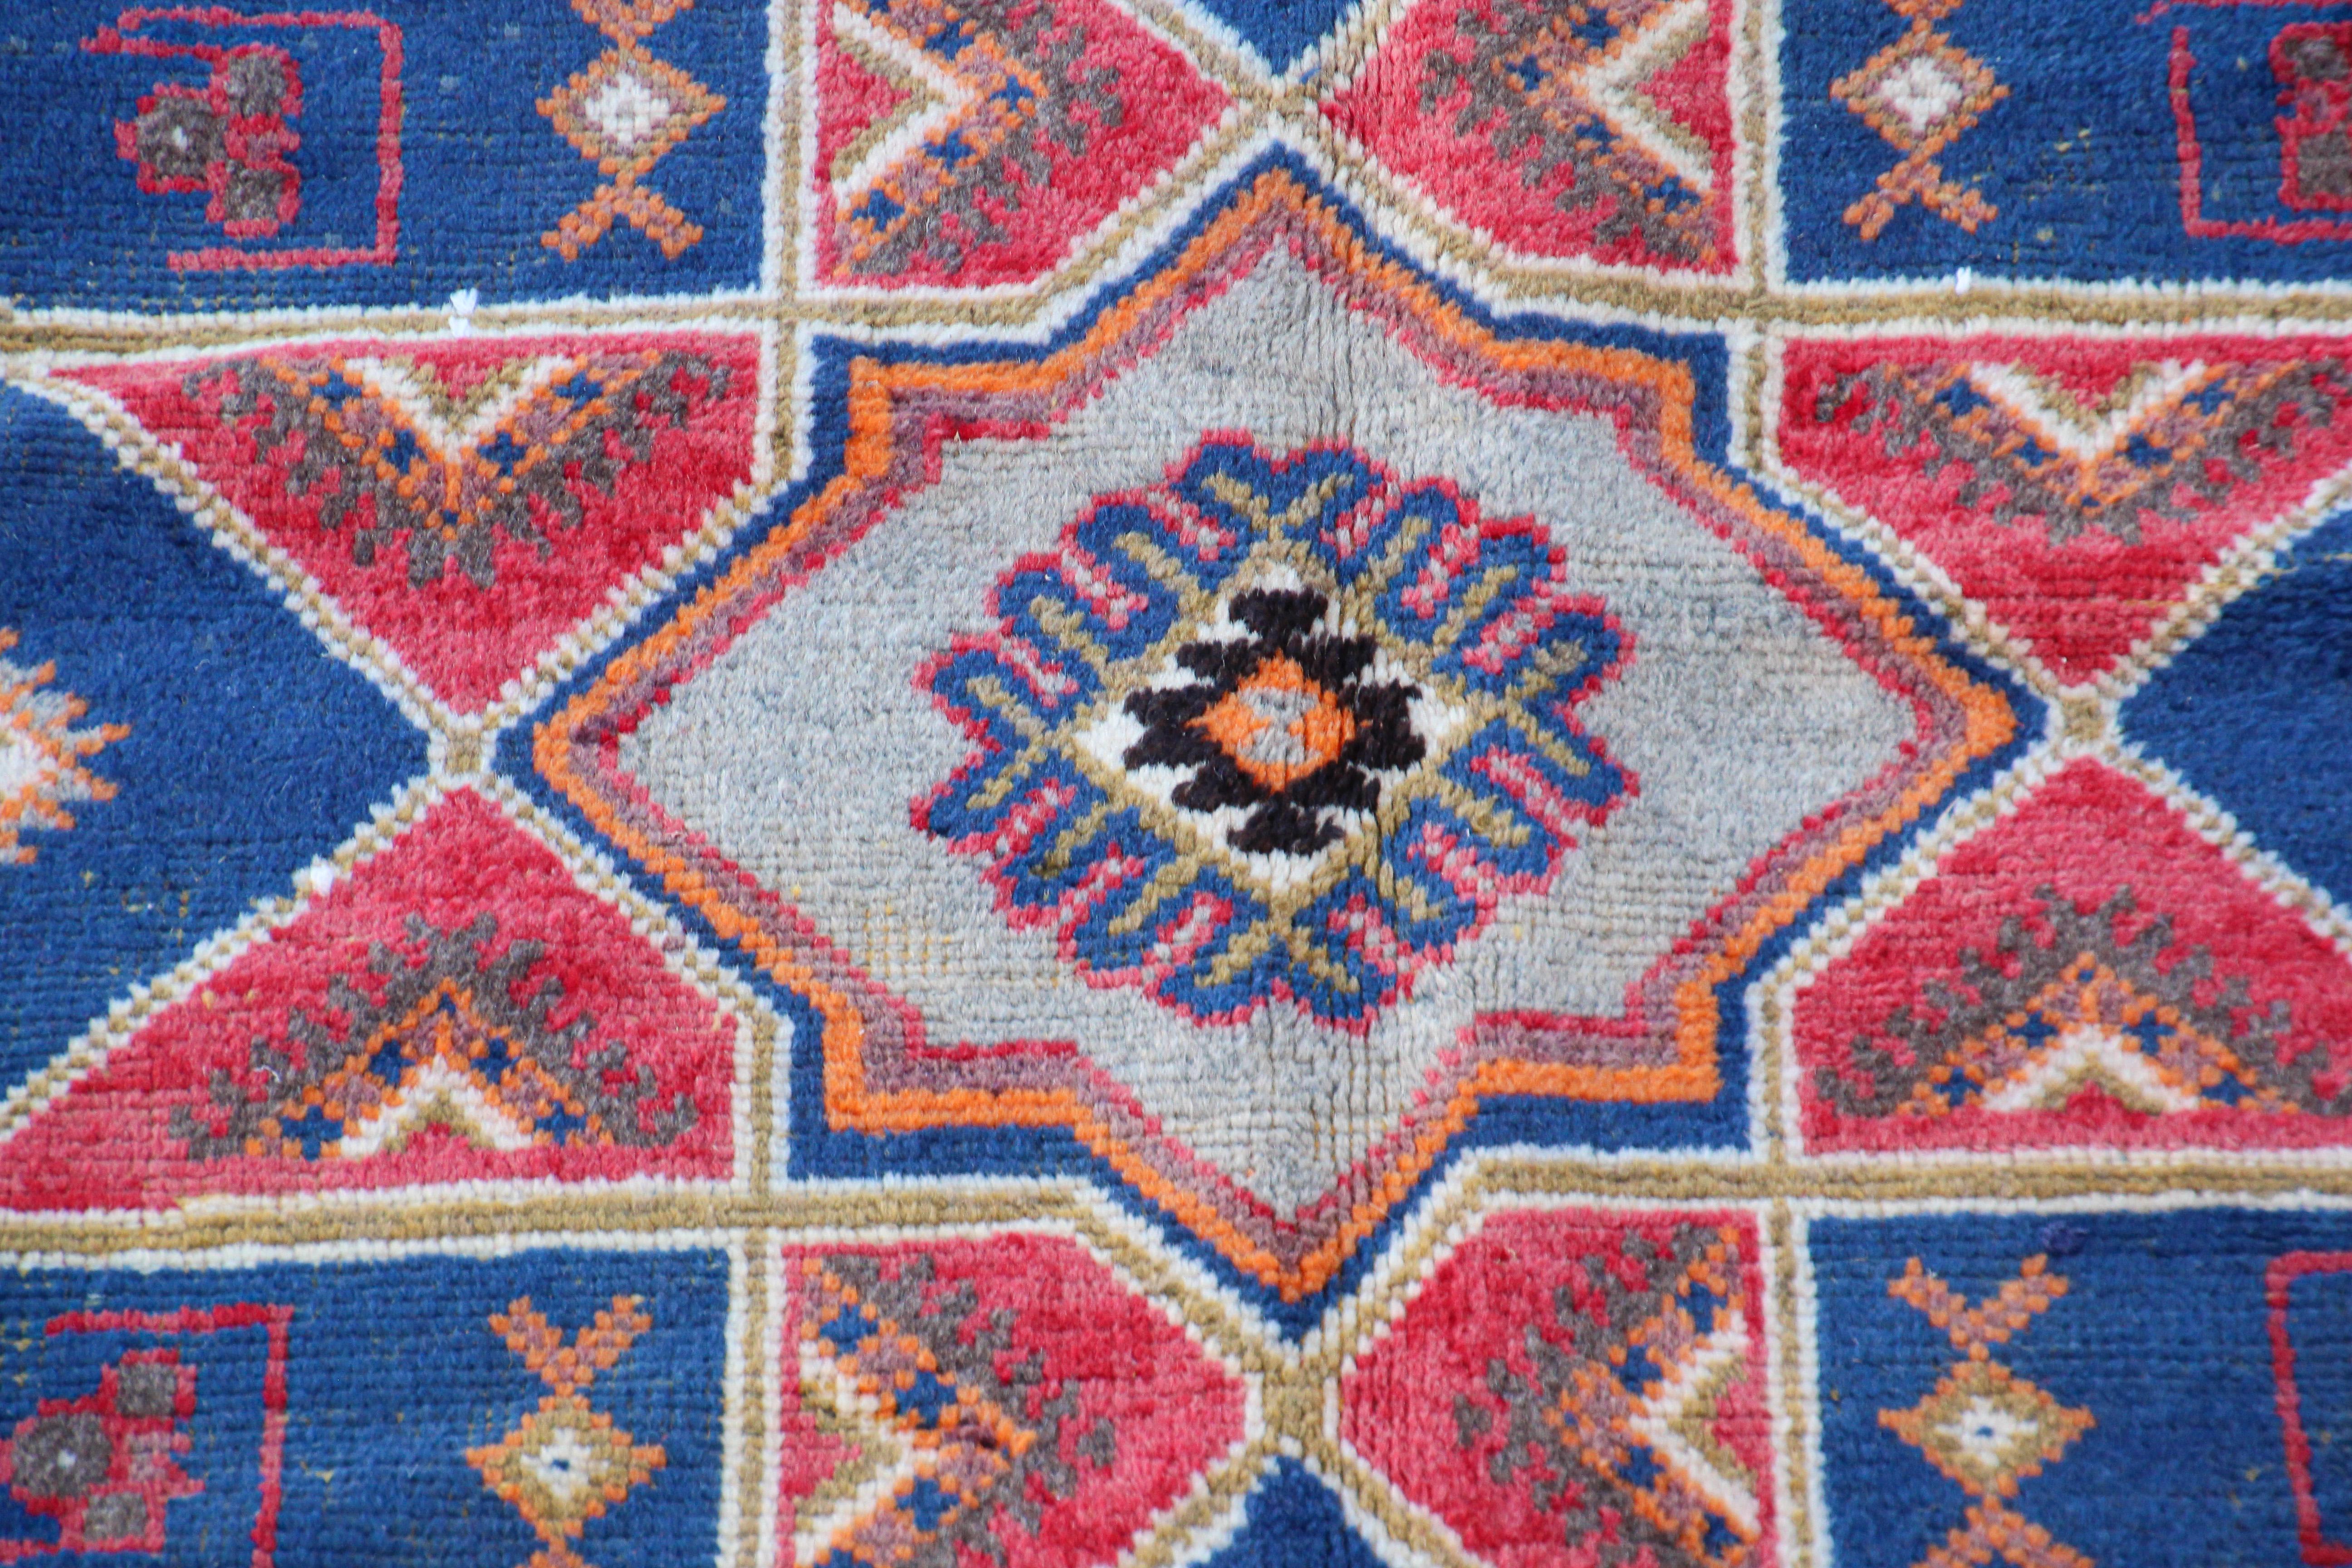 1960s Moroccan Vintage Hand-Woven Berber Rug In Good Condition For Sale In North Hollywood, CA